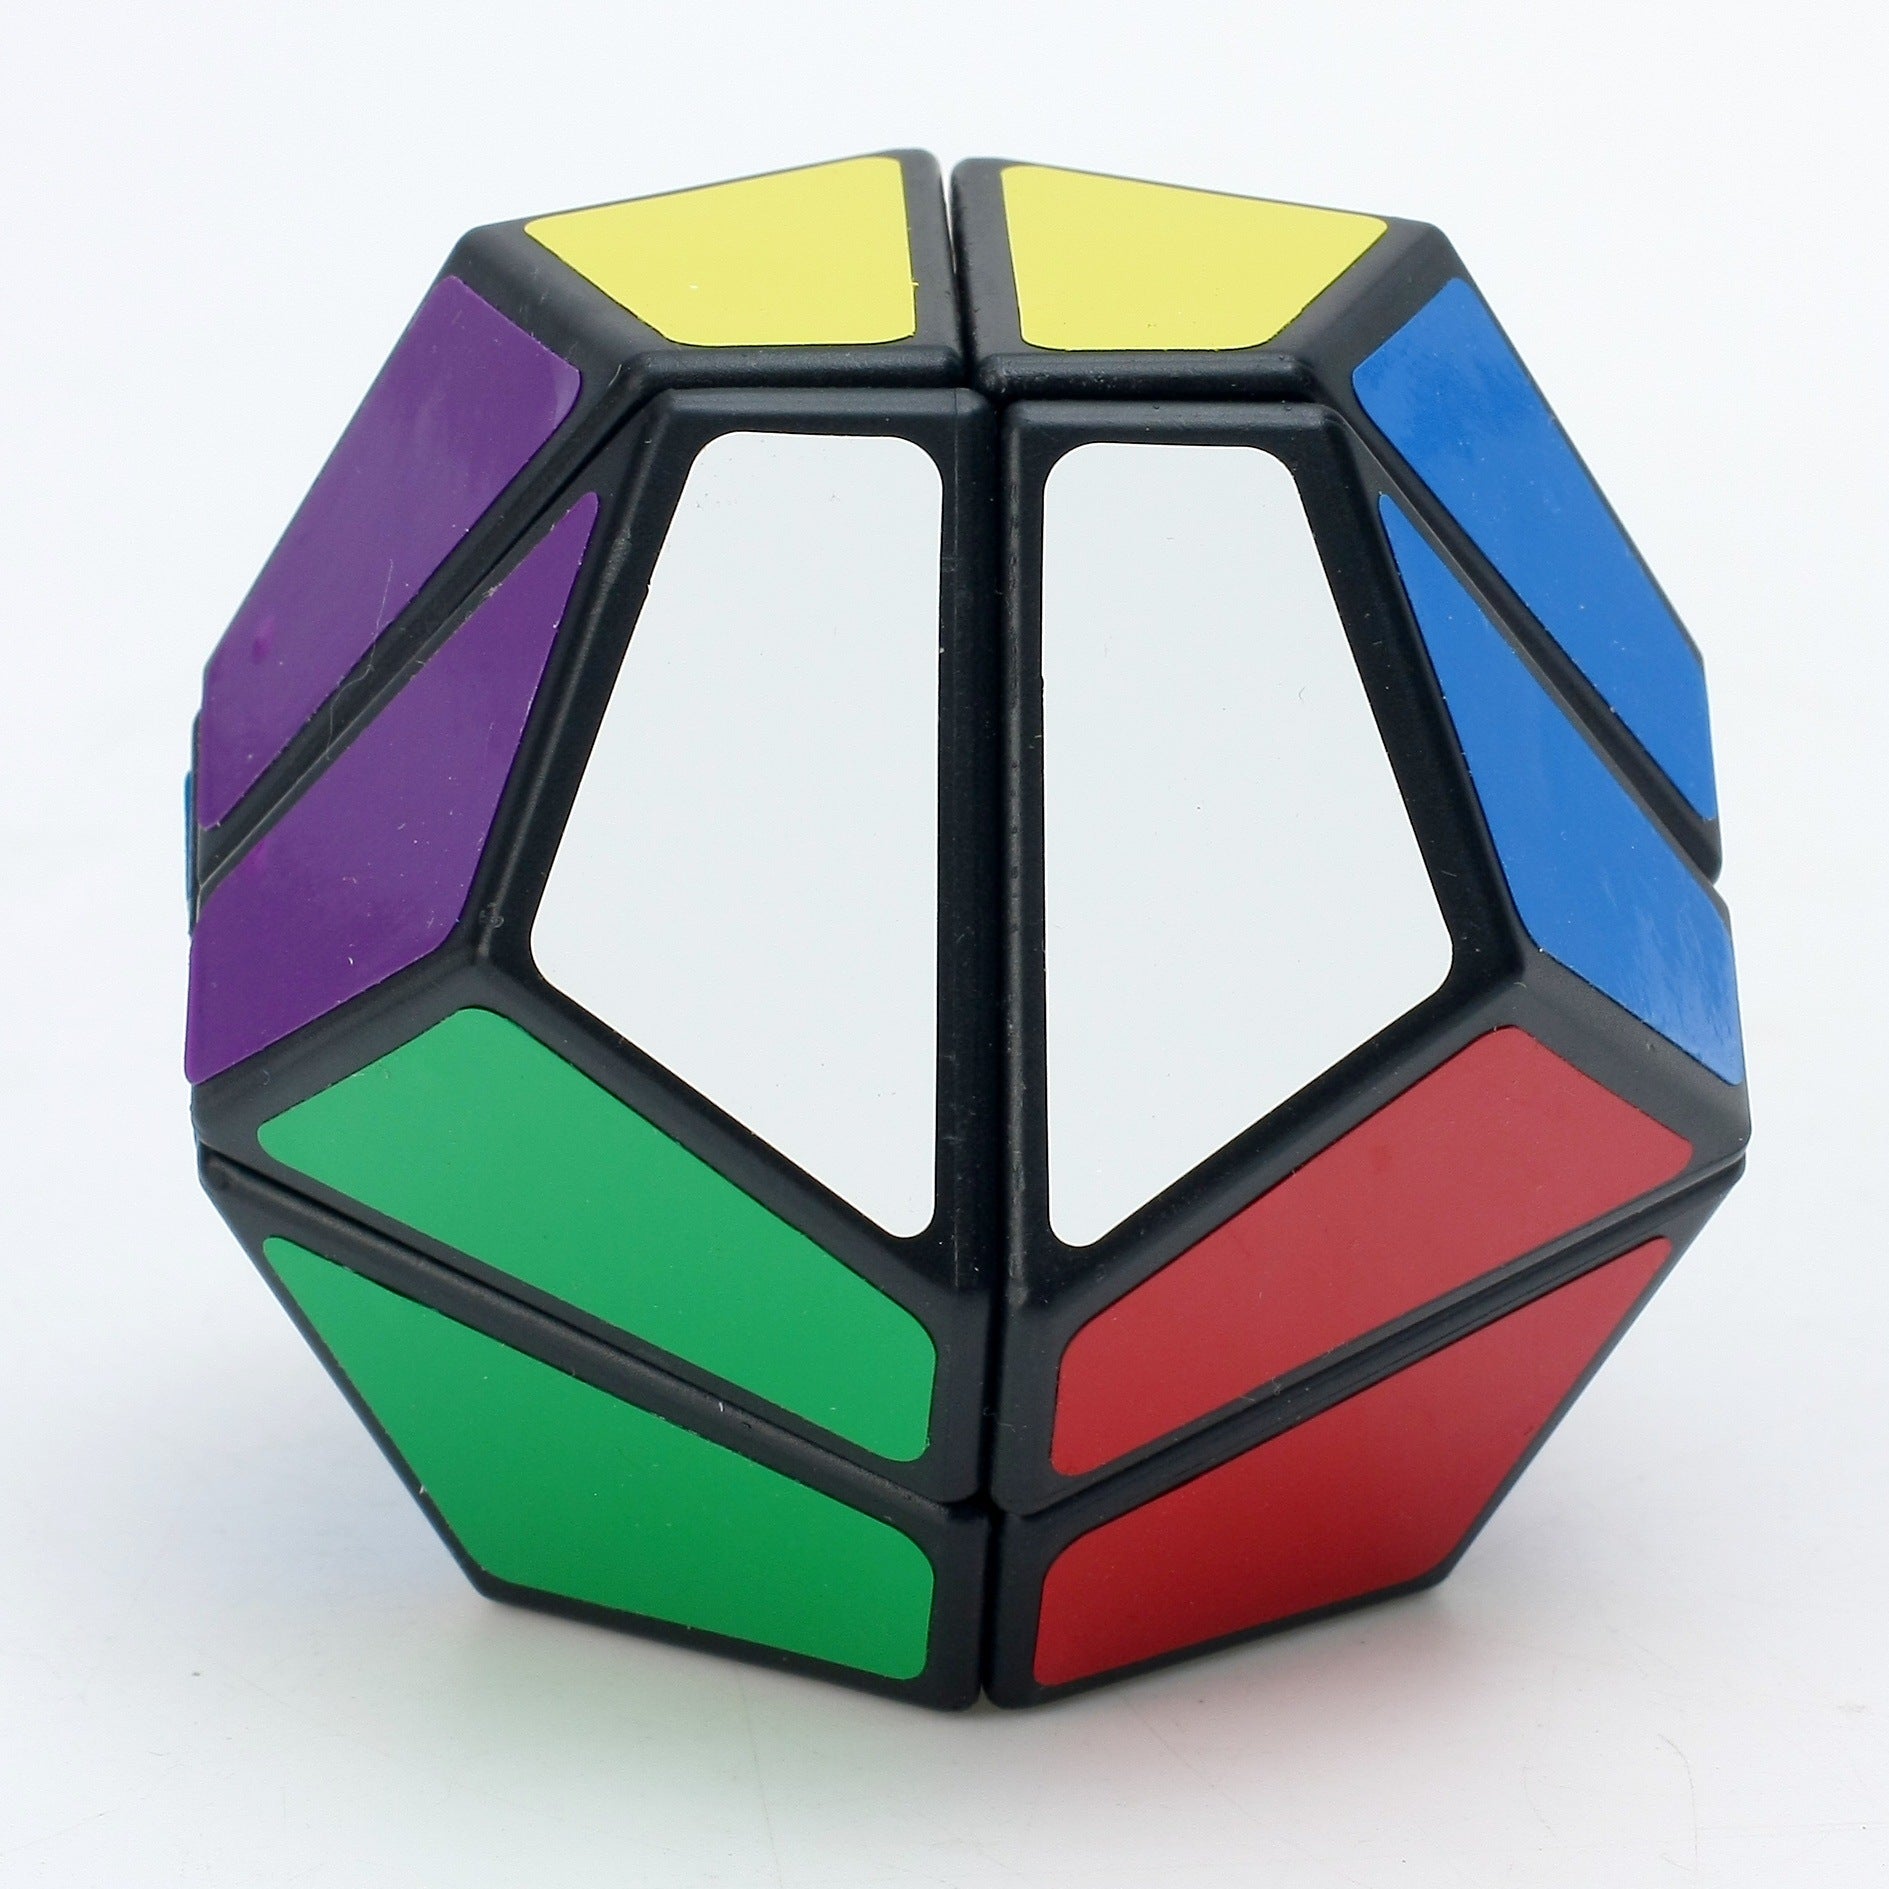 Dodecahedron shaped cube toys